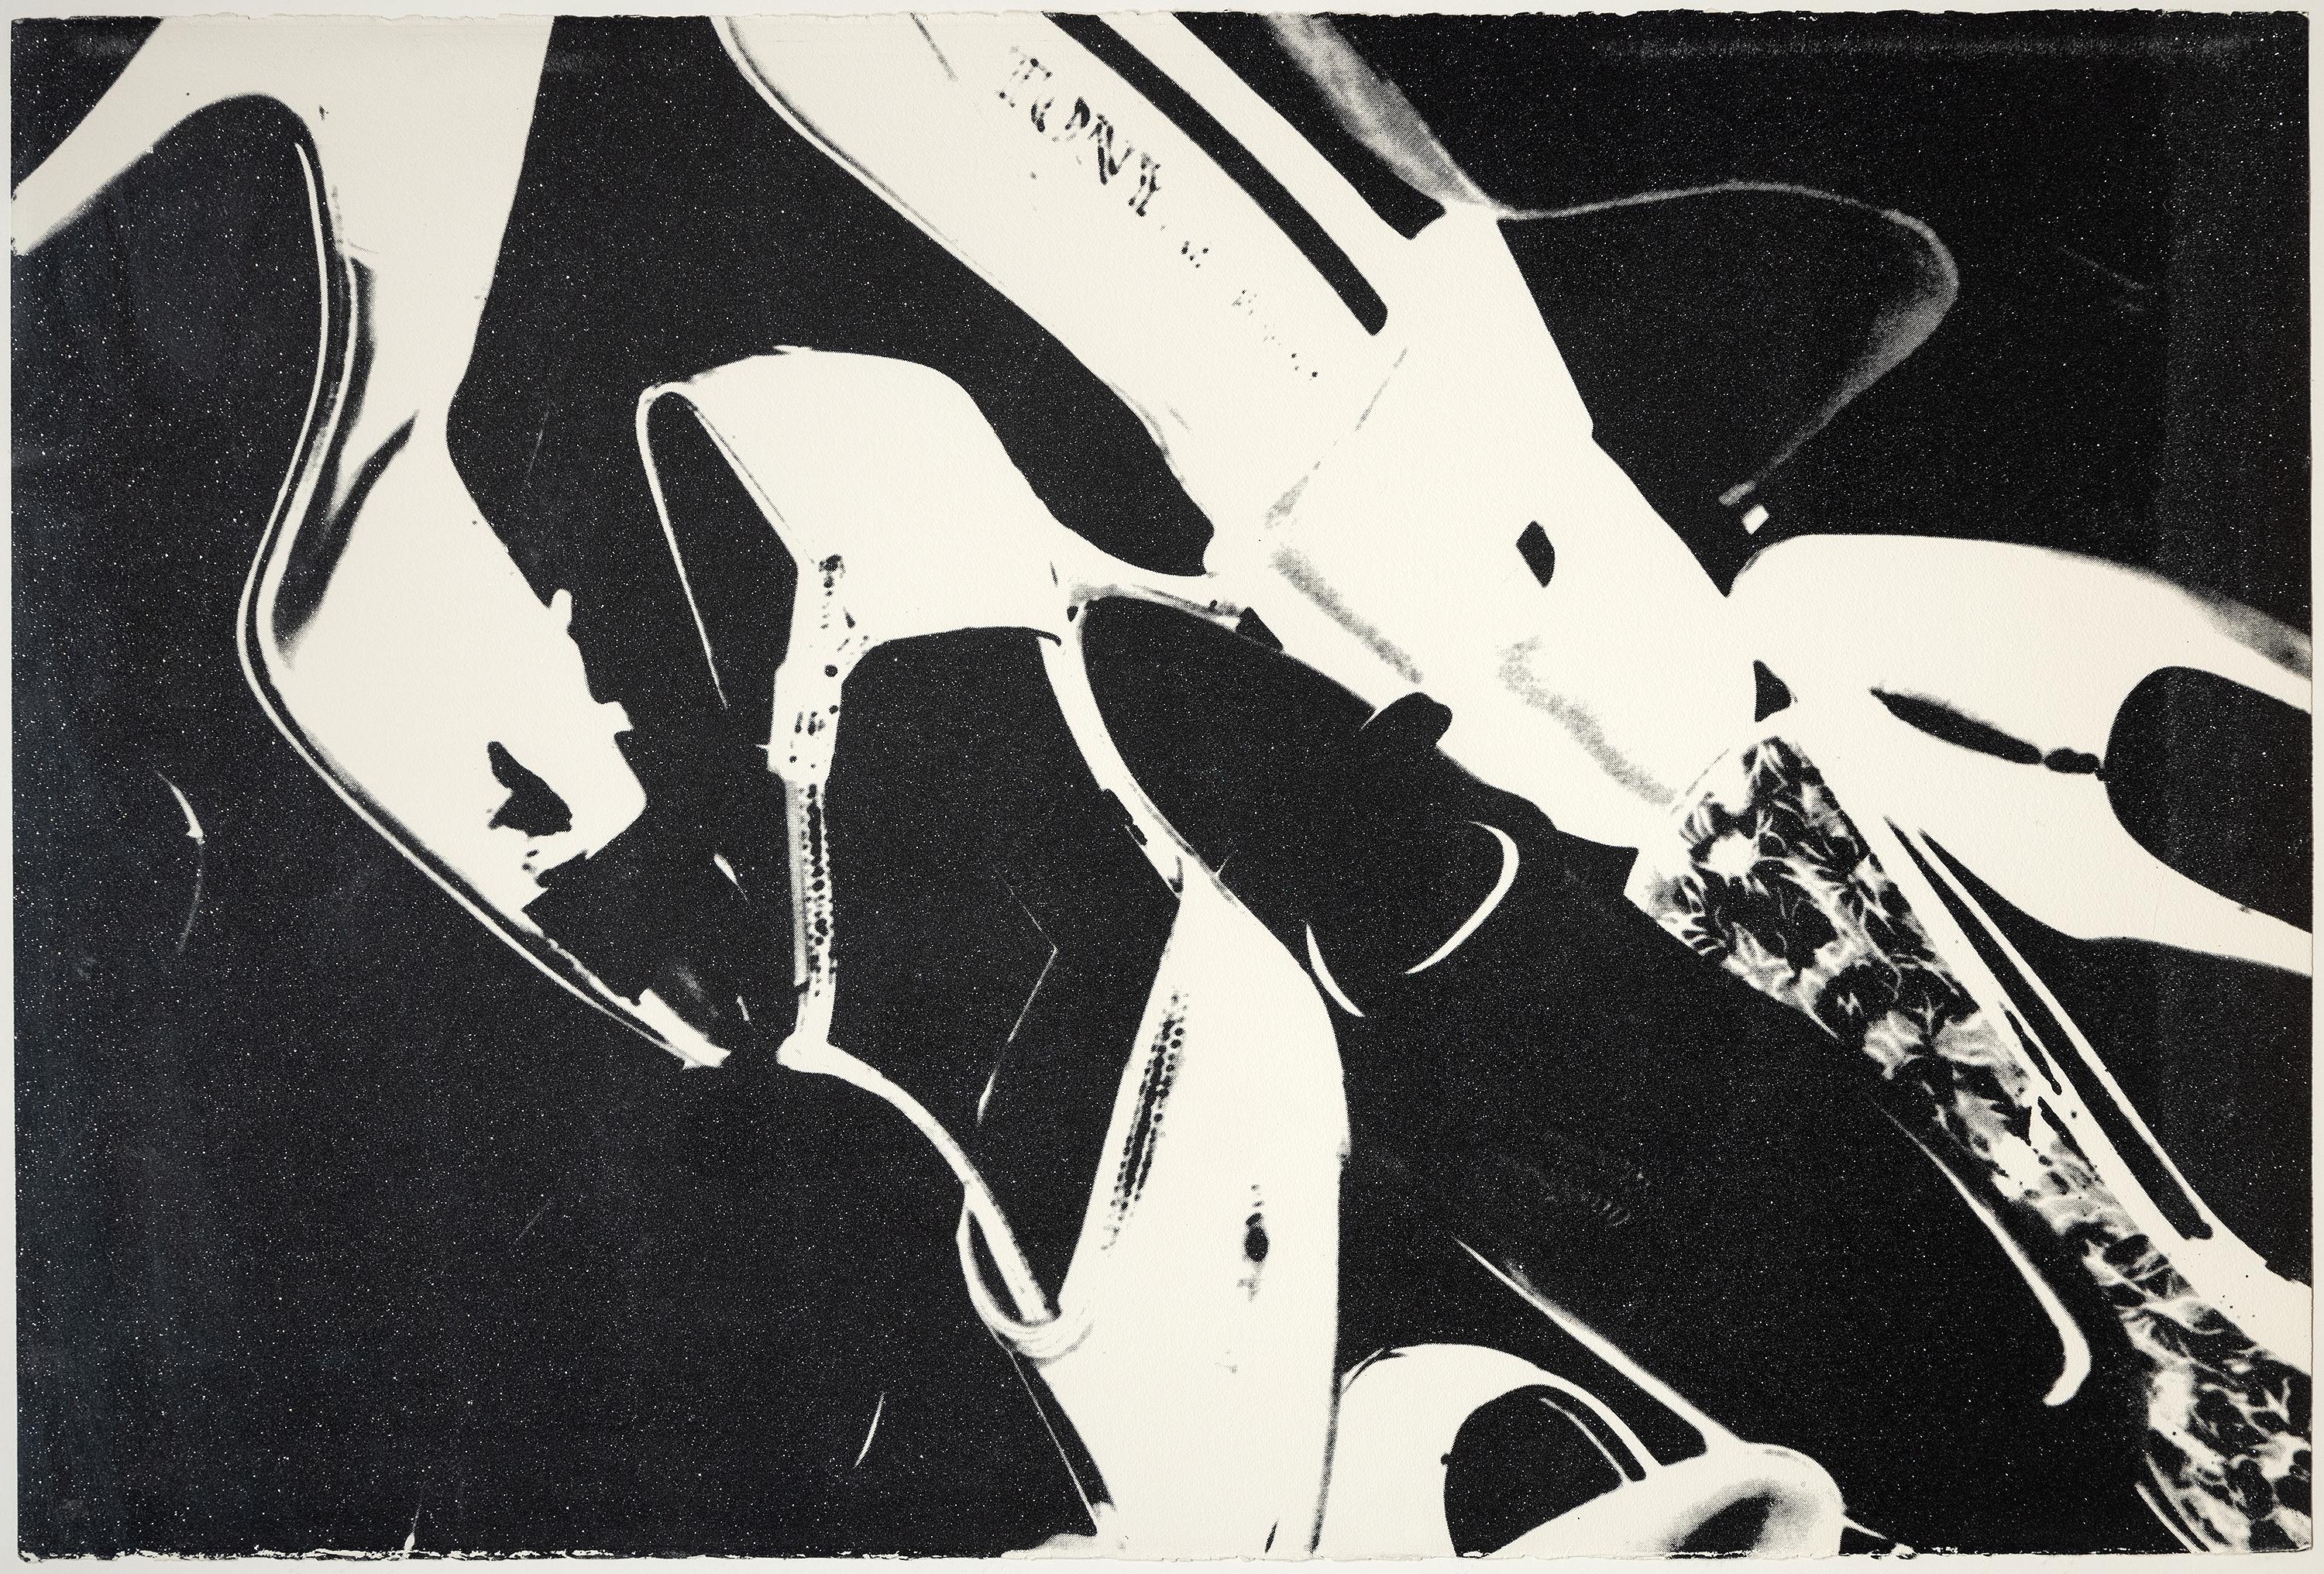 Diamond Dust Shoes (Black and White) - Print by Andy Warhol